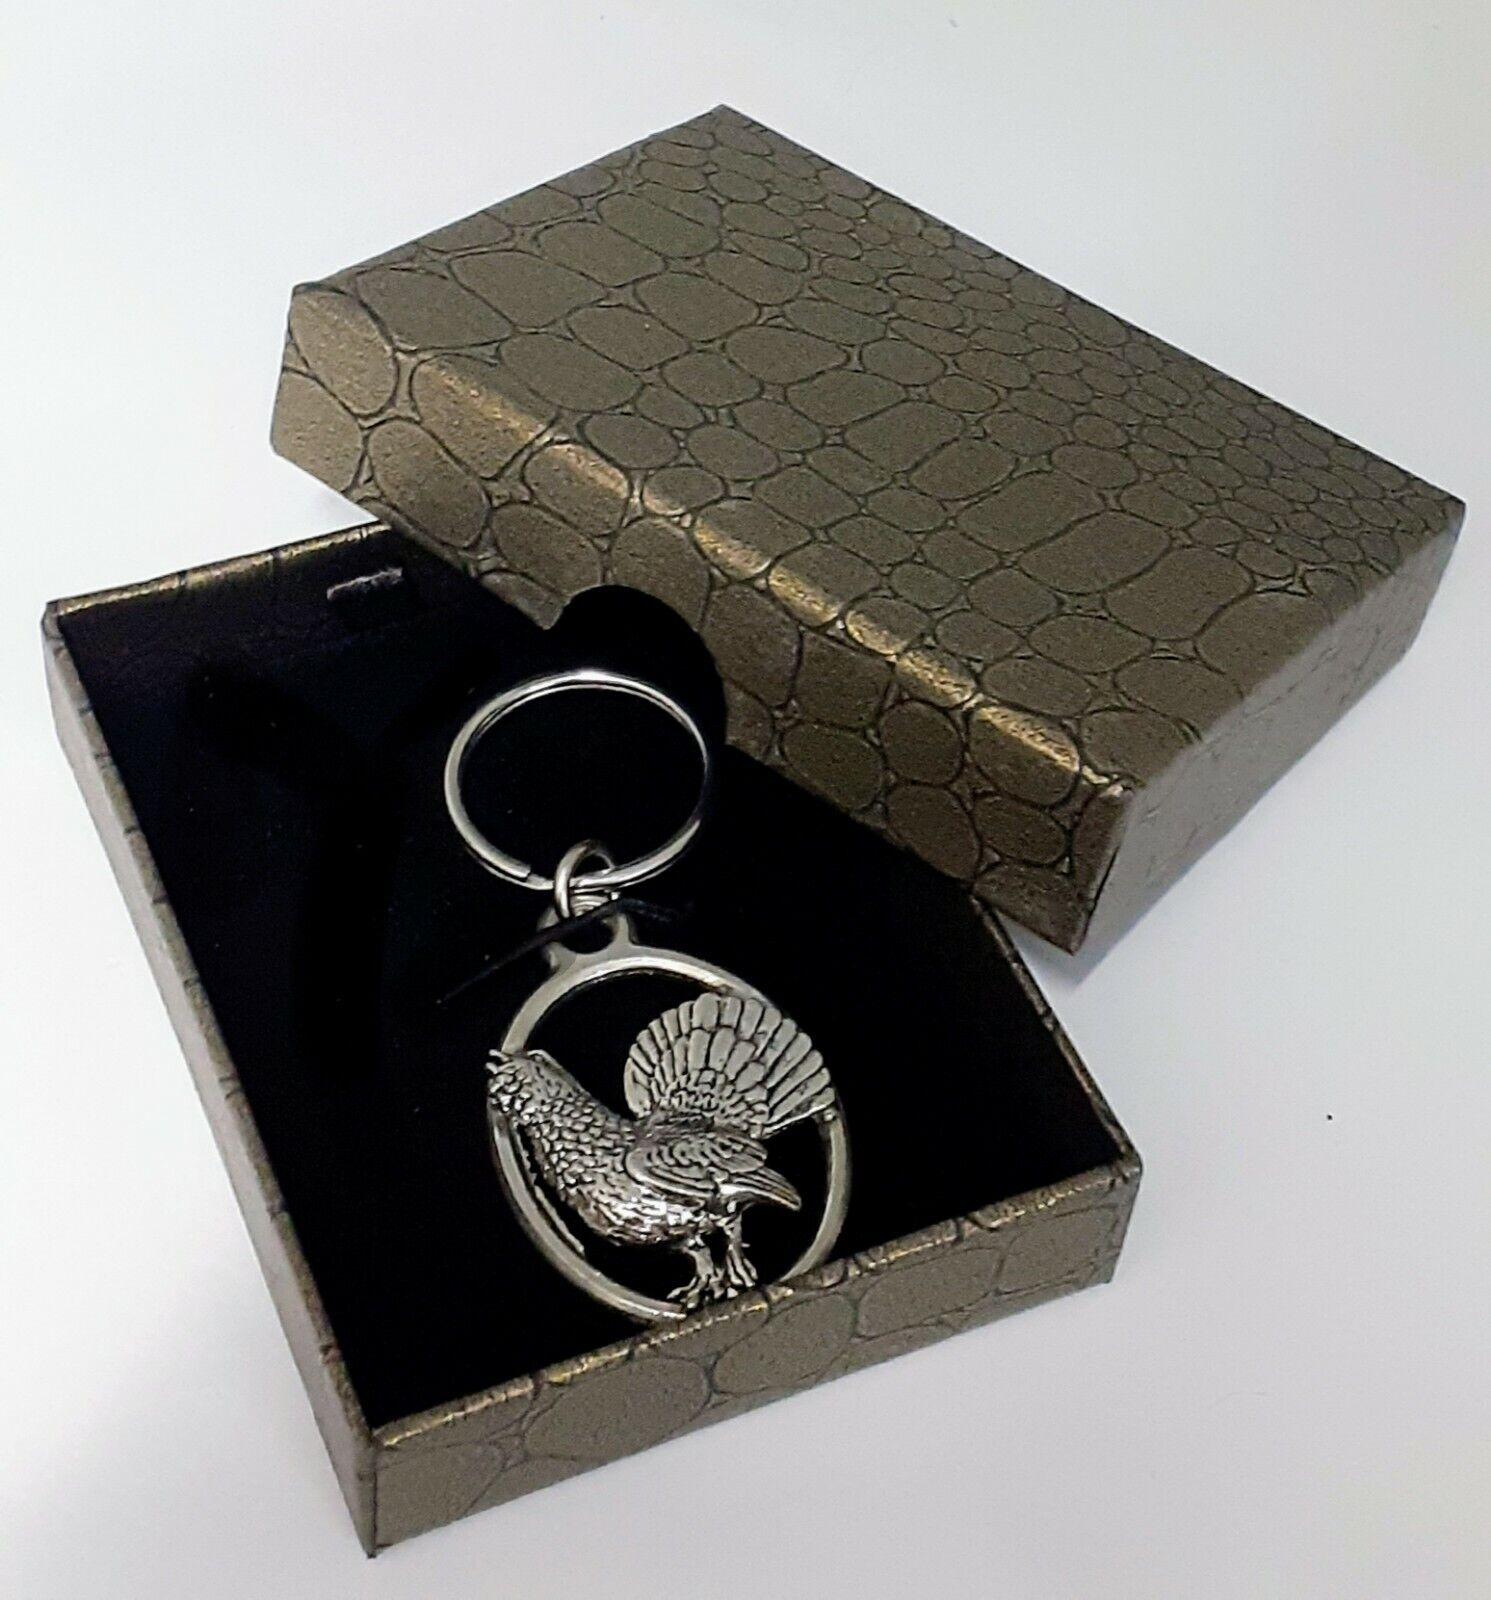 Capercaillie, Wood Grouse Bird, PEWTER KEYRING, For Key rings, Bags, etc (KB21)